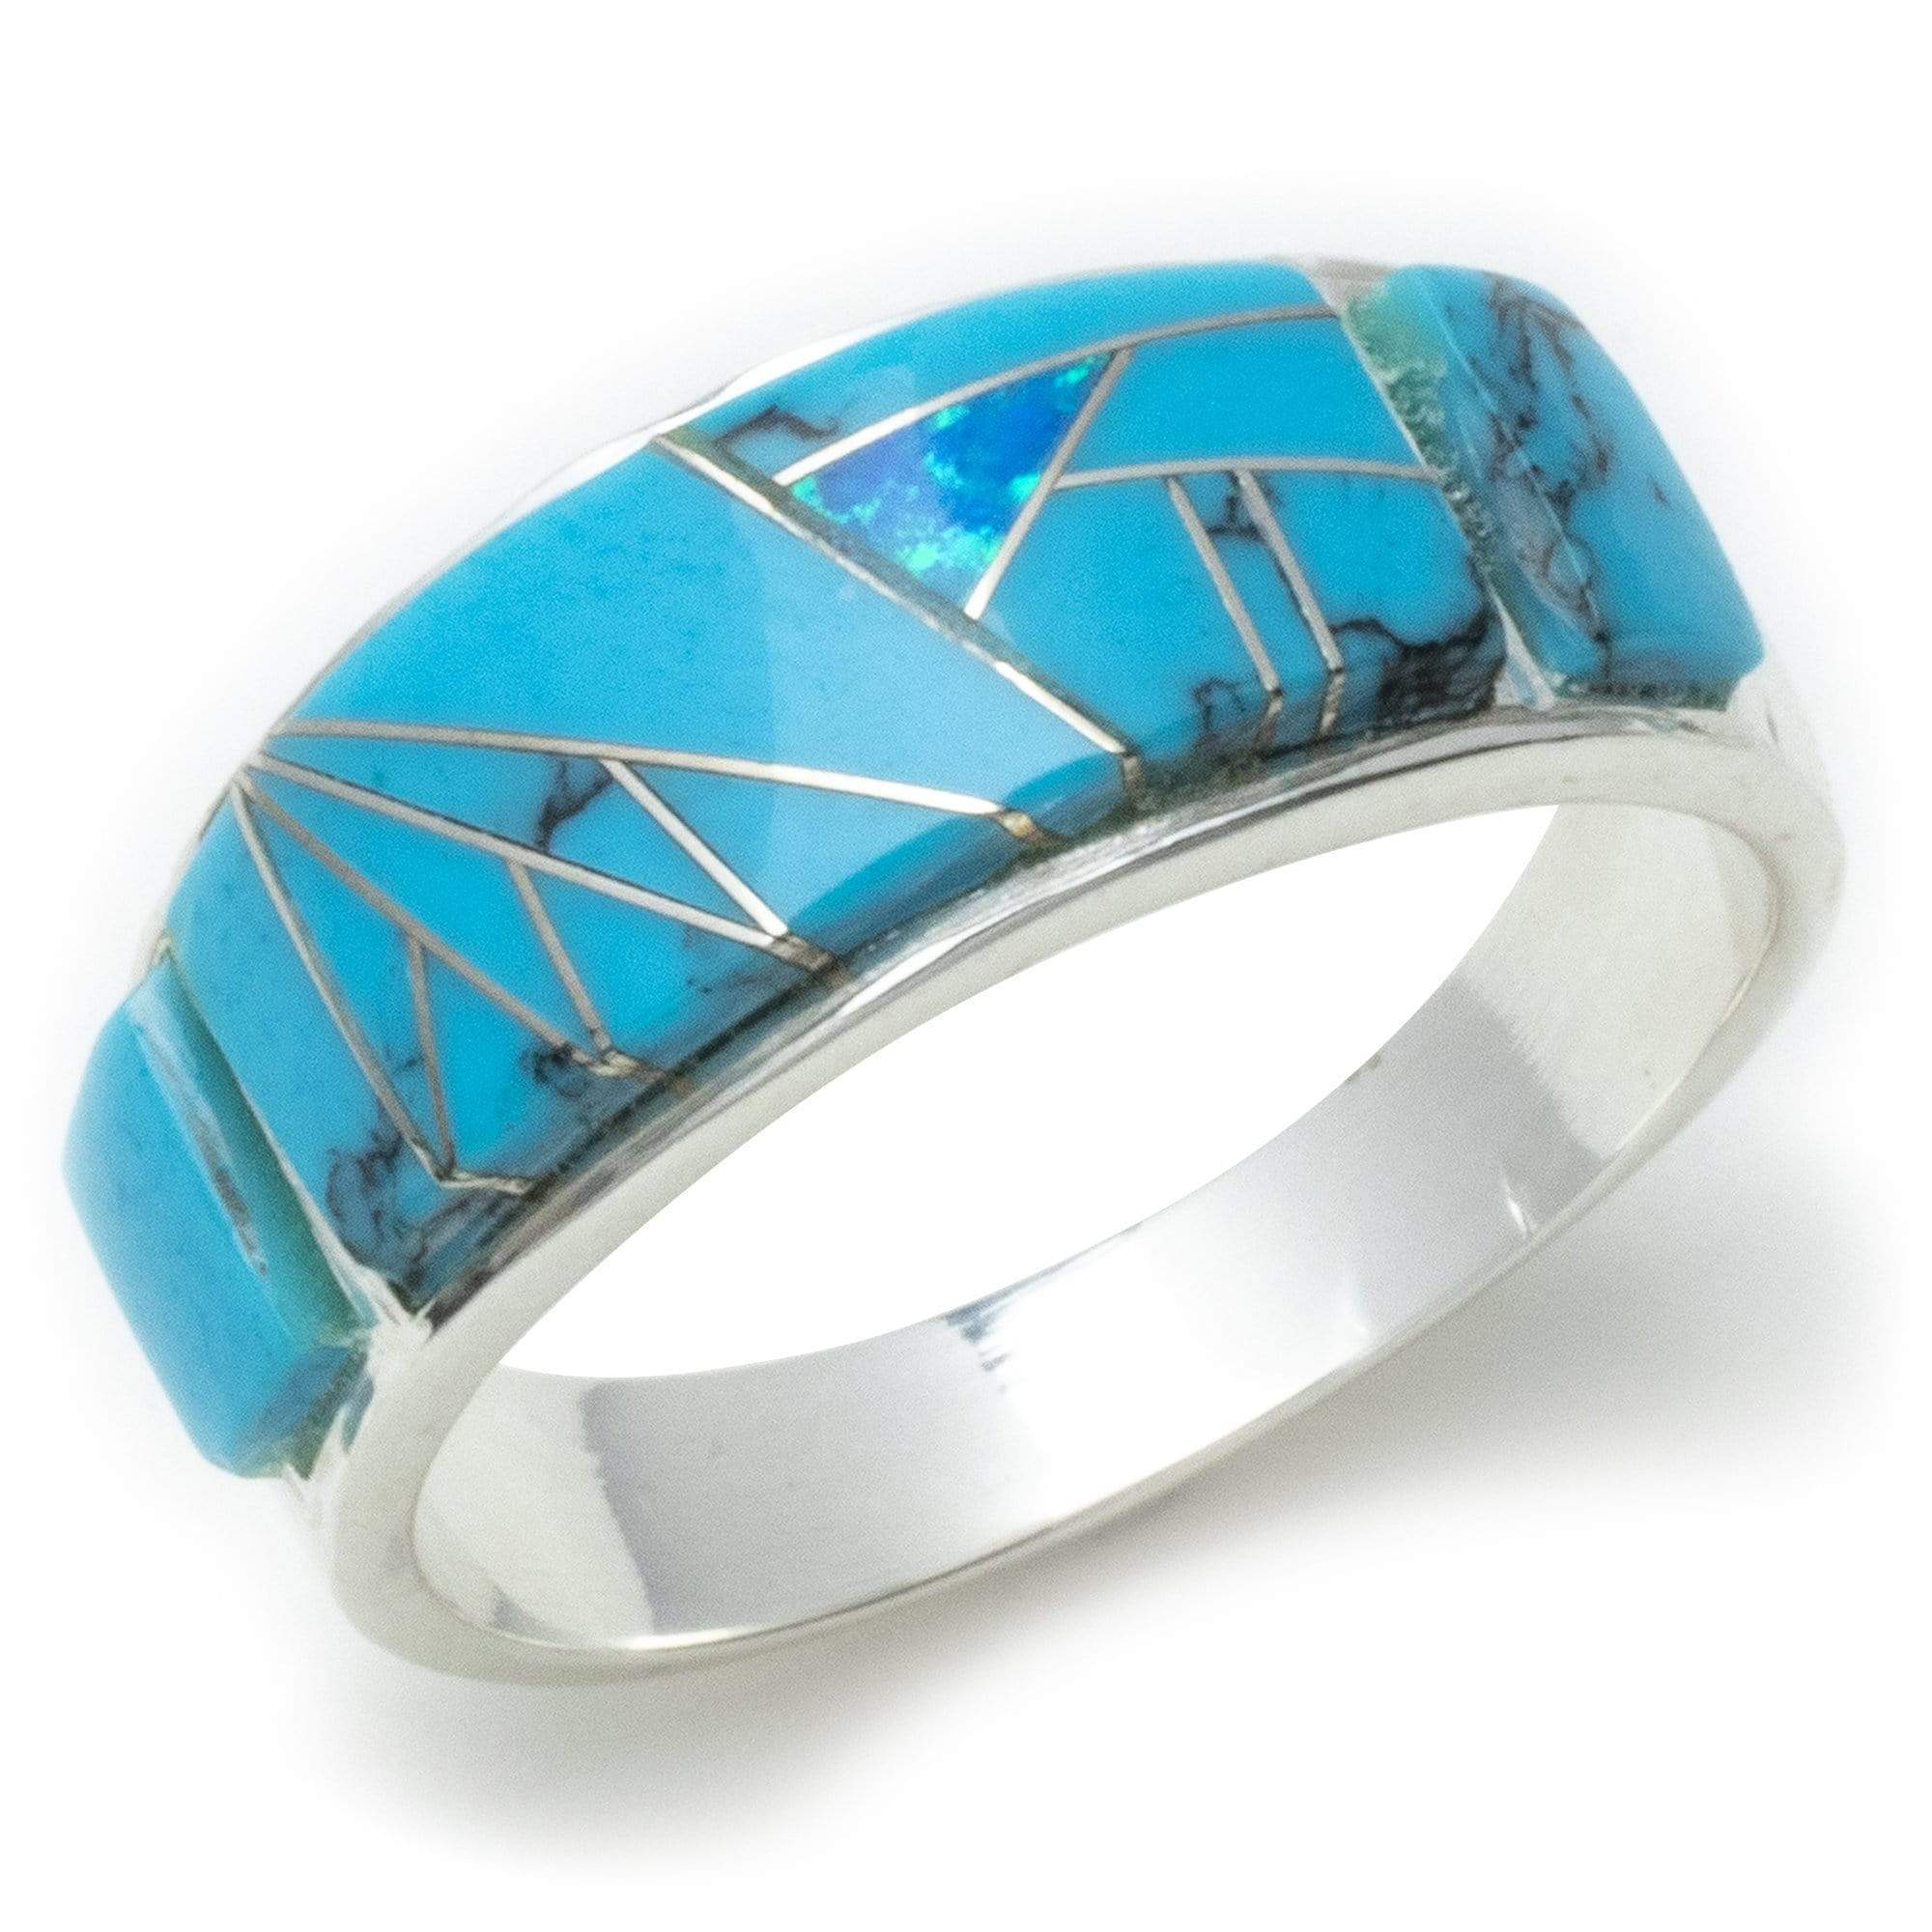 Kalifano Southwest Silver Jewelry Turquoise 925 Sterling Silver Ring USA Handmade with Labratory Opal Accent